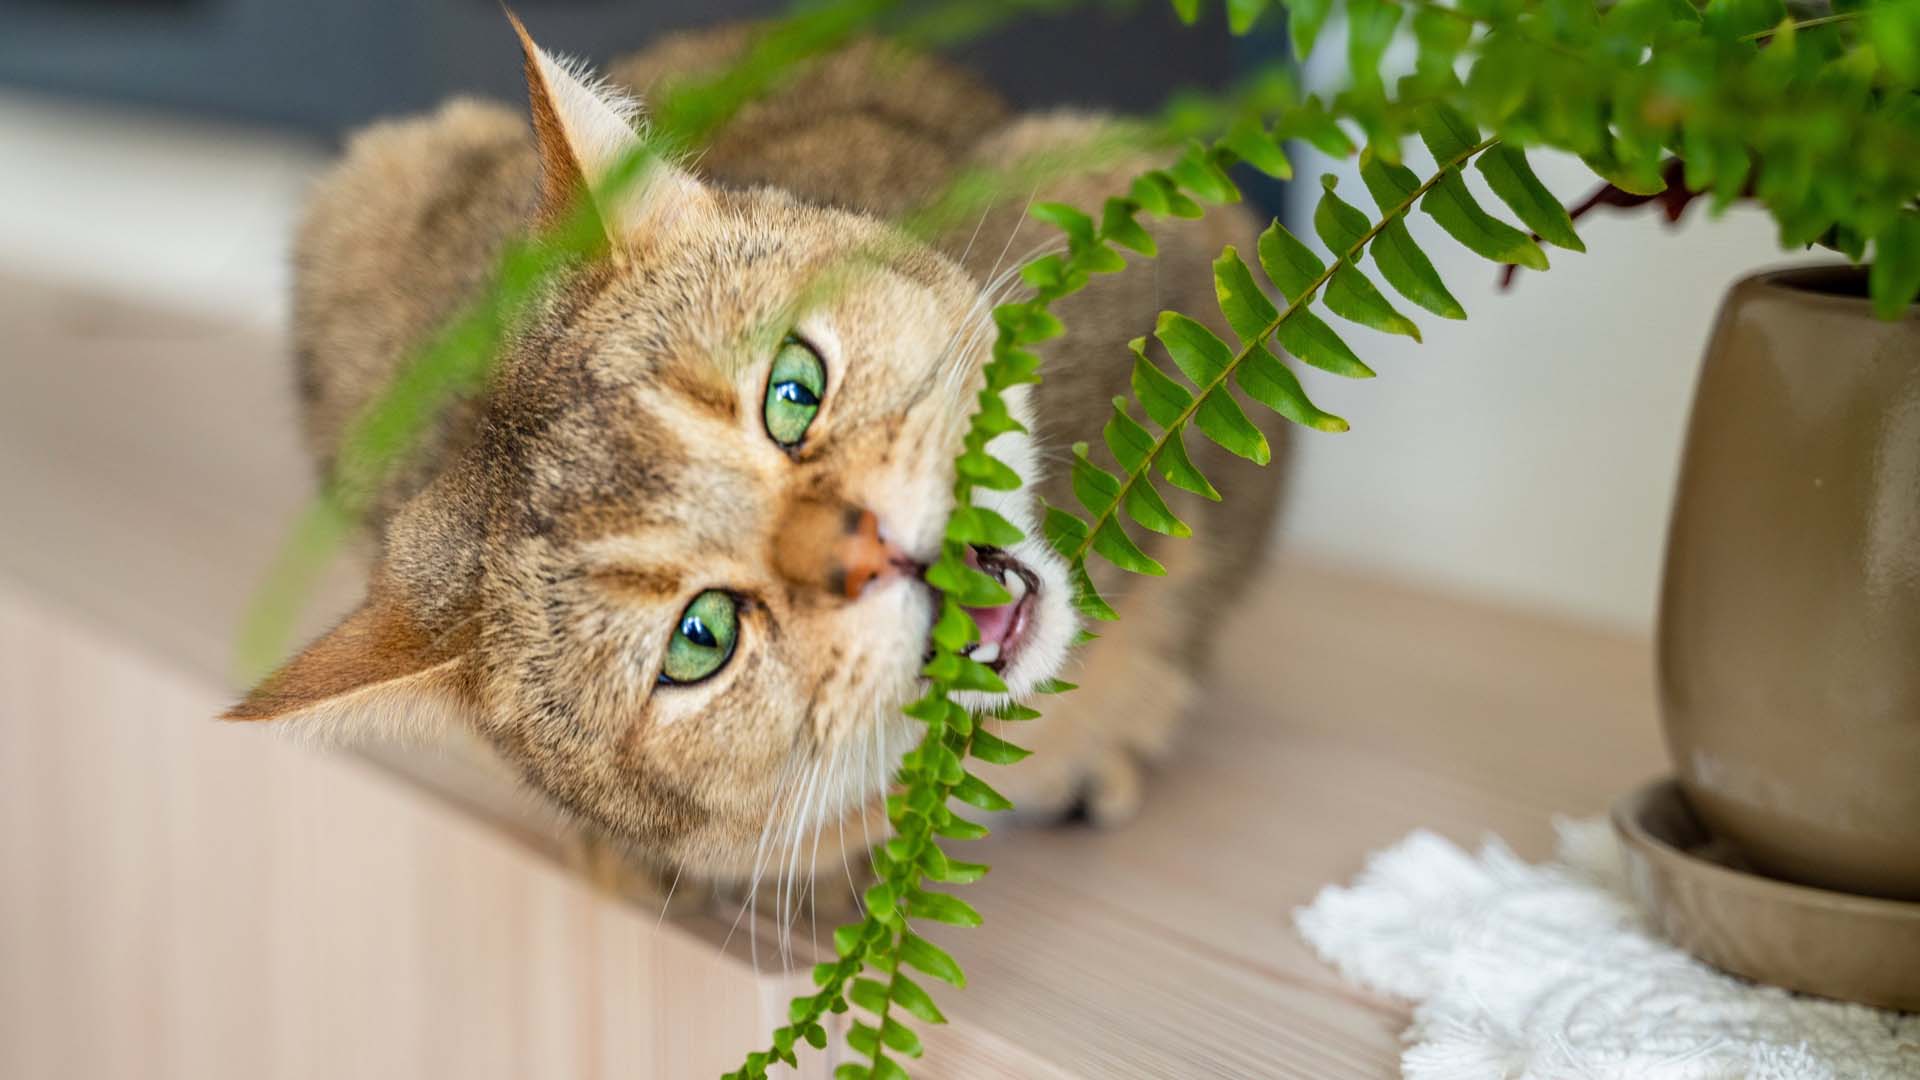 Ginger cat with green eyes biting a branch of a Fern plant